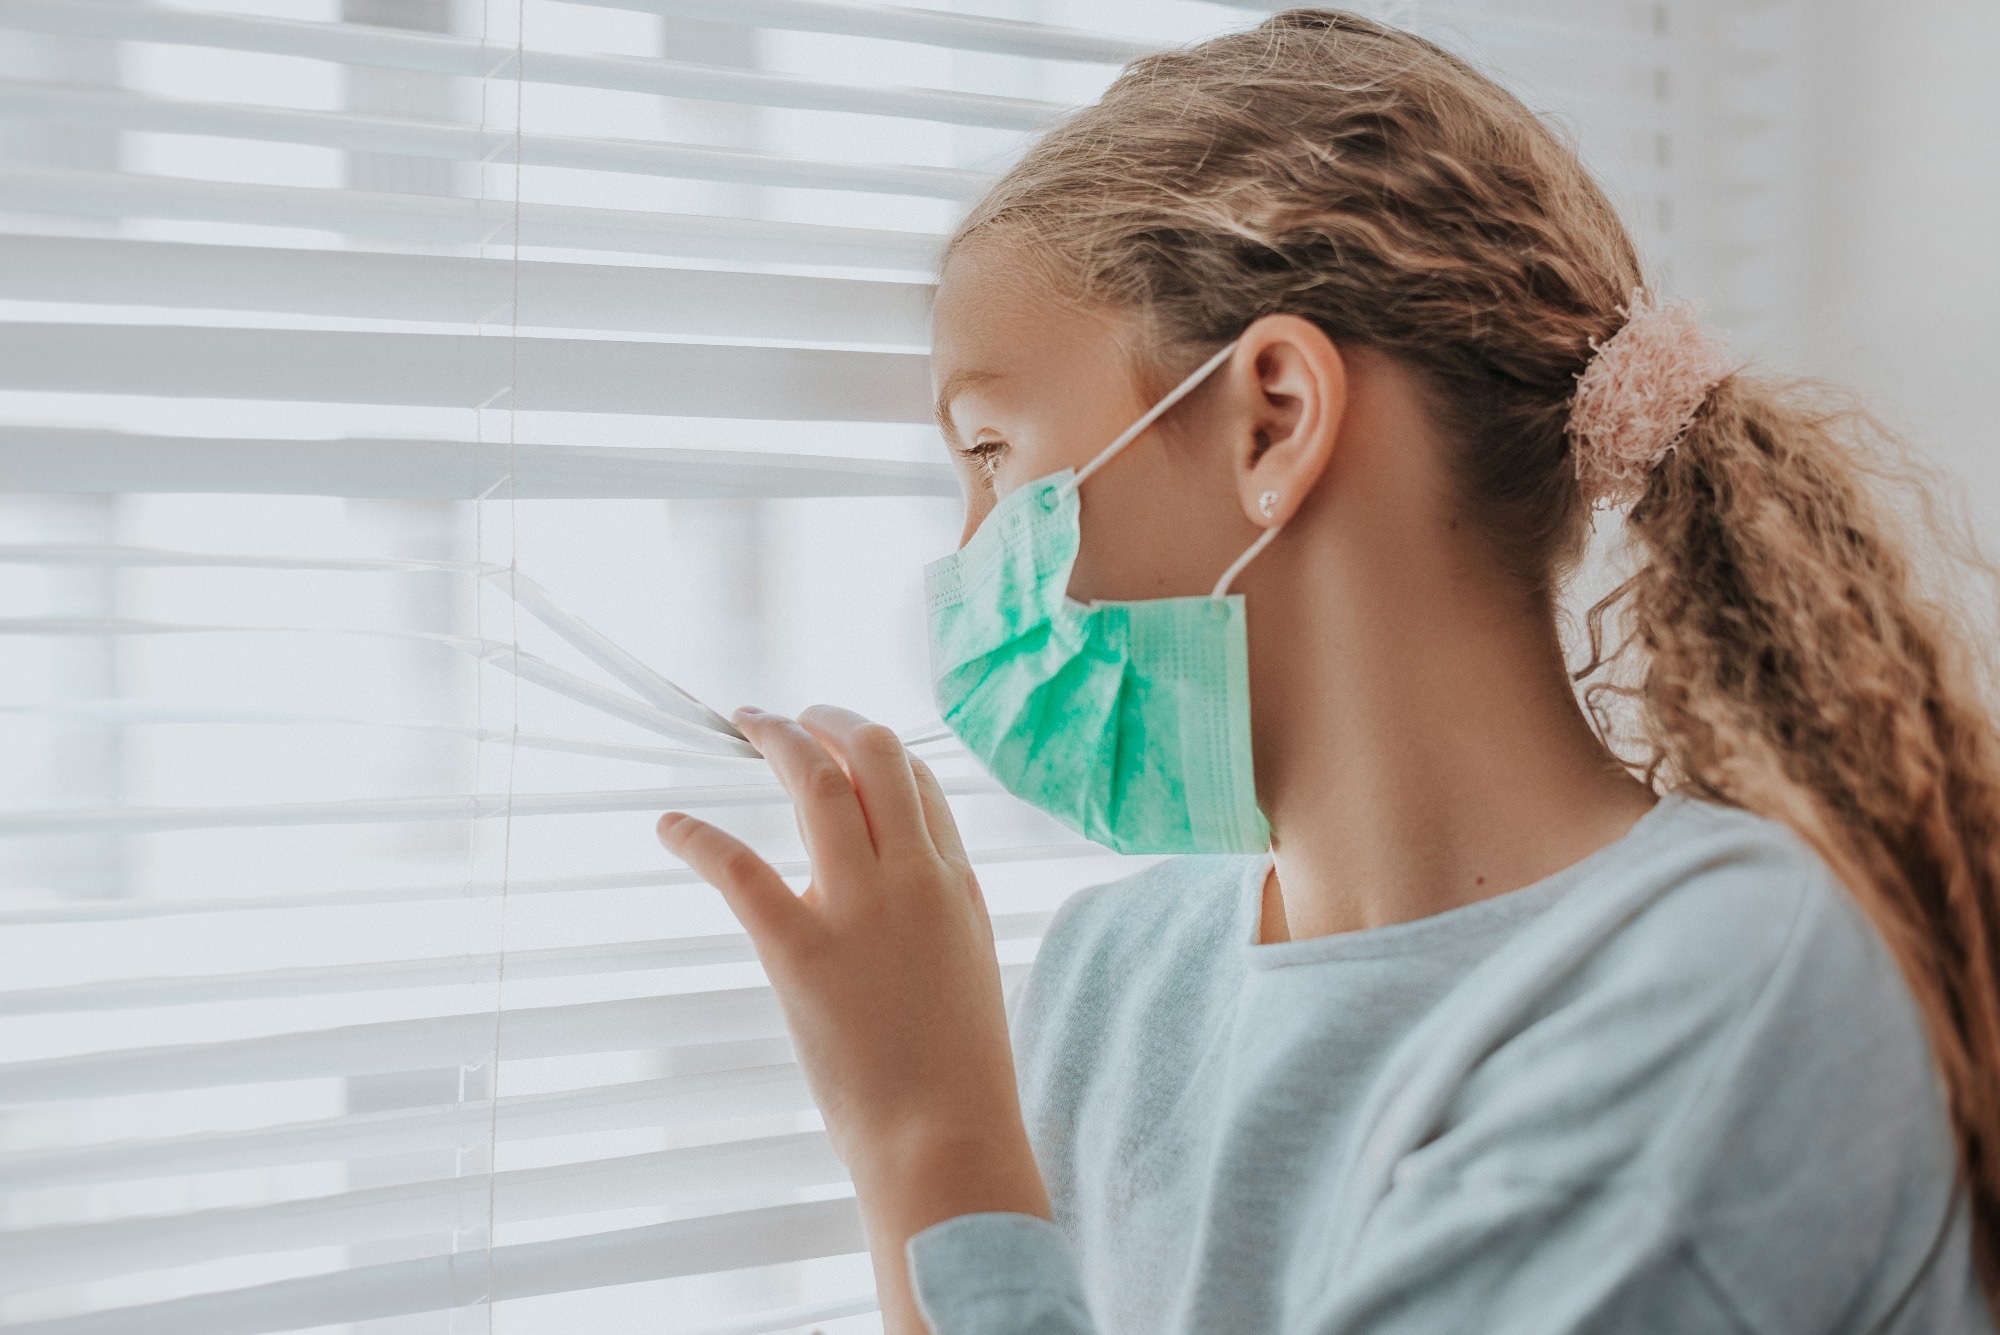 Study: Mindfulness supports emotional resilience in children during the COVID-19 Pandemic. Image Credit: altafulla/Shutterstock